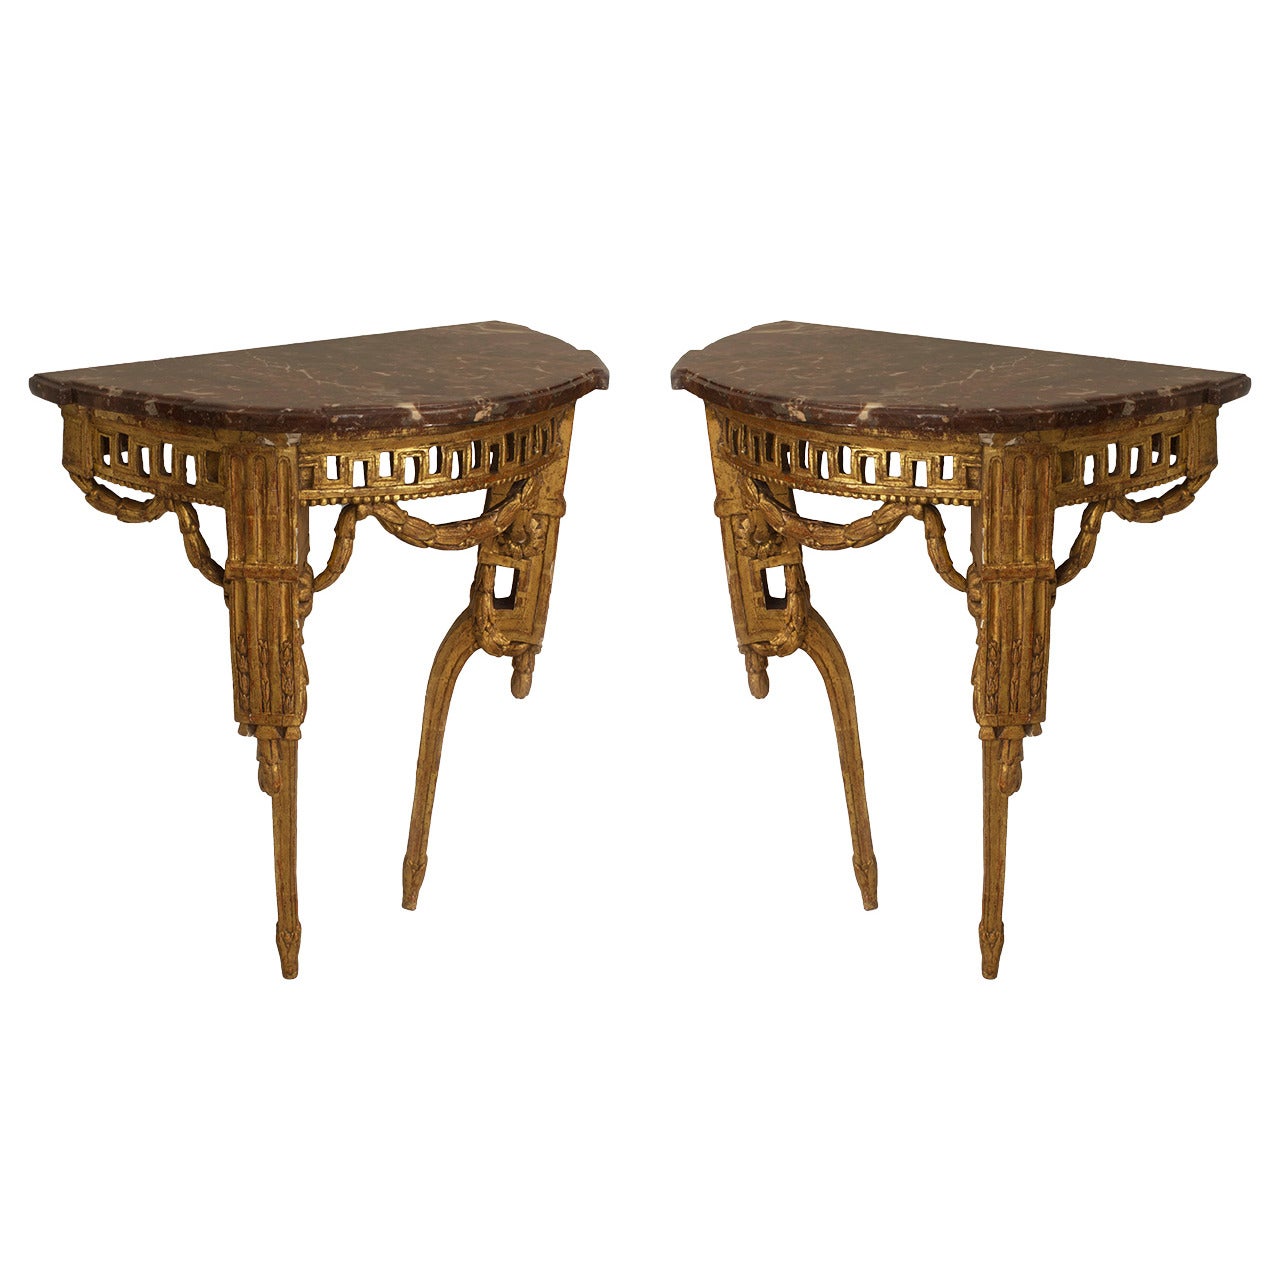 Pair of Late 18th Century Italian Neoclassical Bracket Console Tables